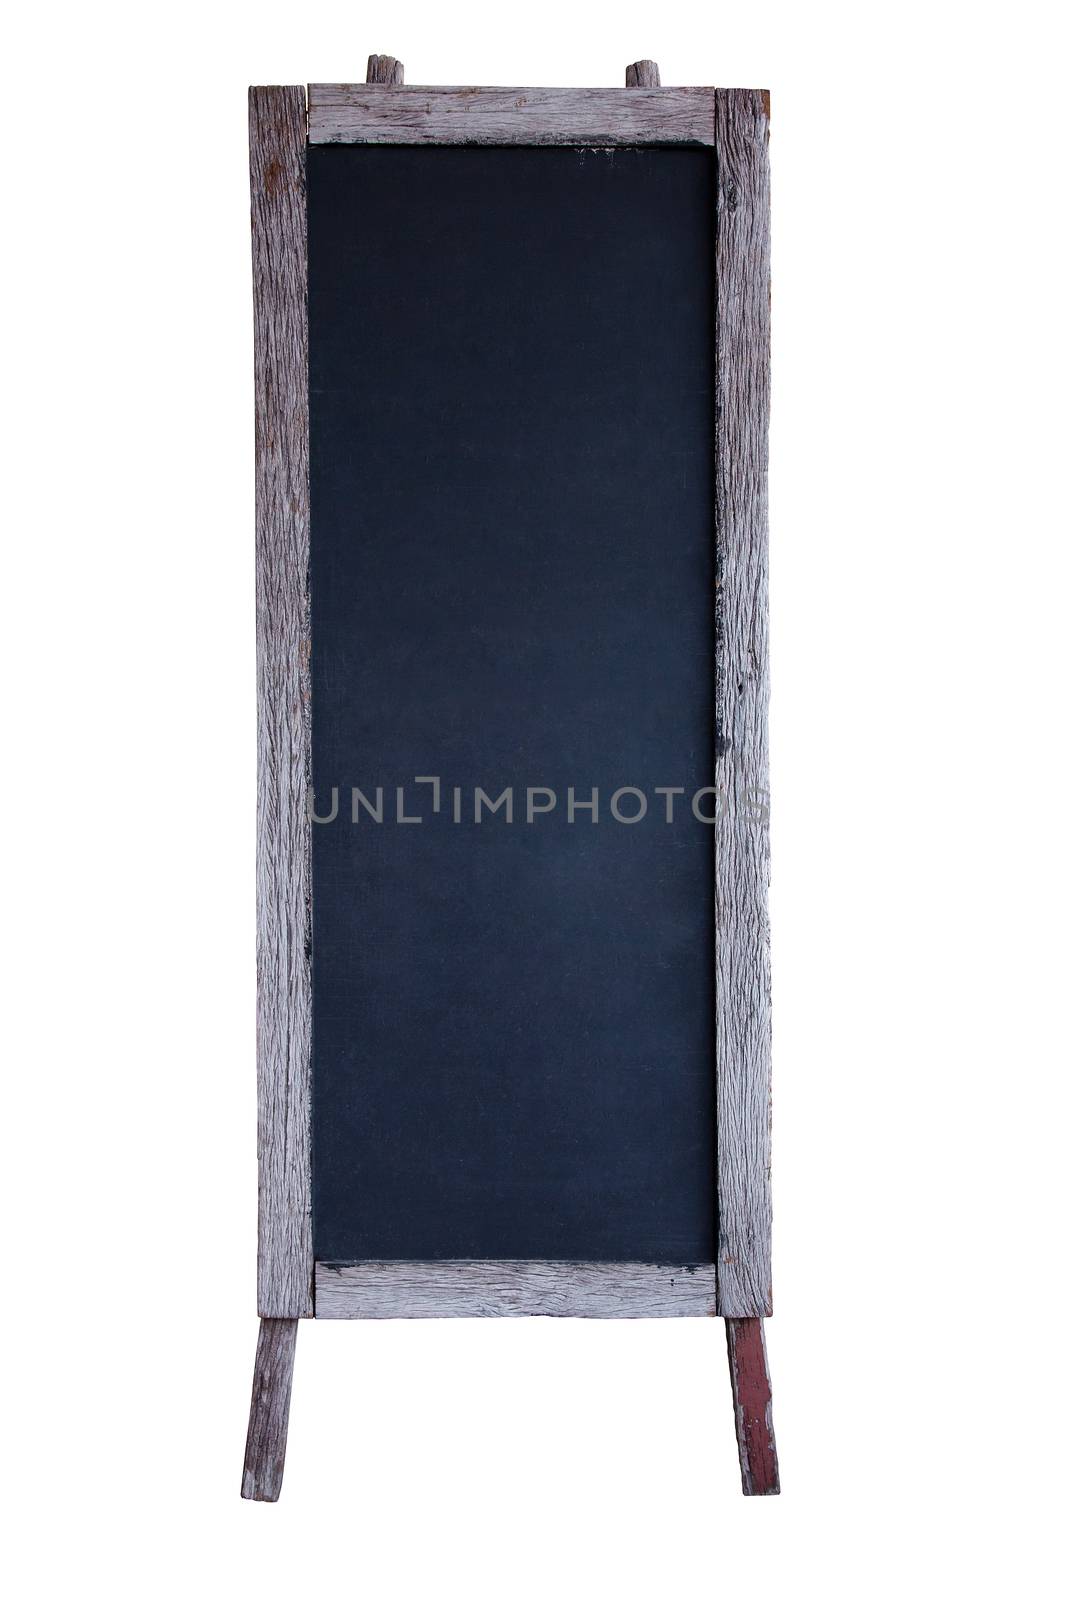 Blank Wooden Sign by ponsulak